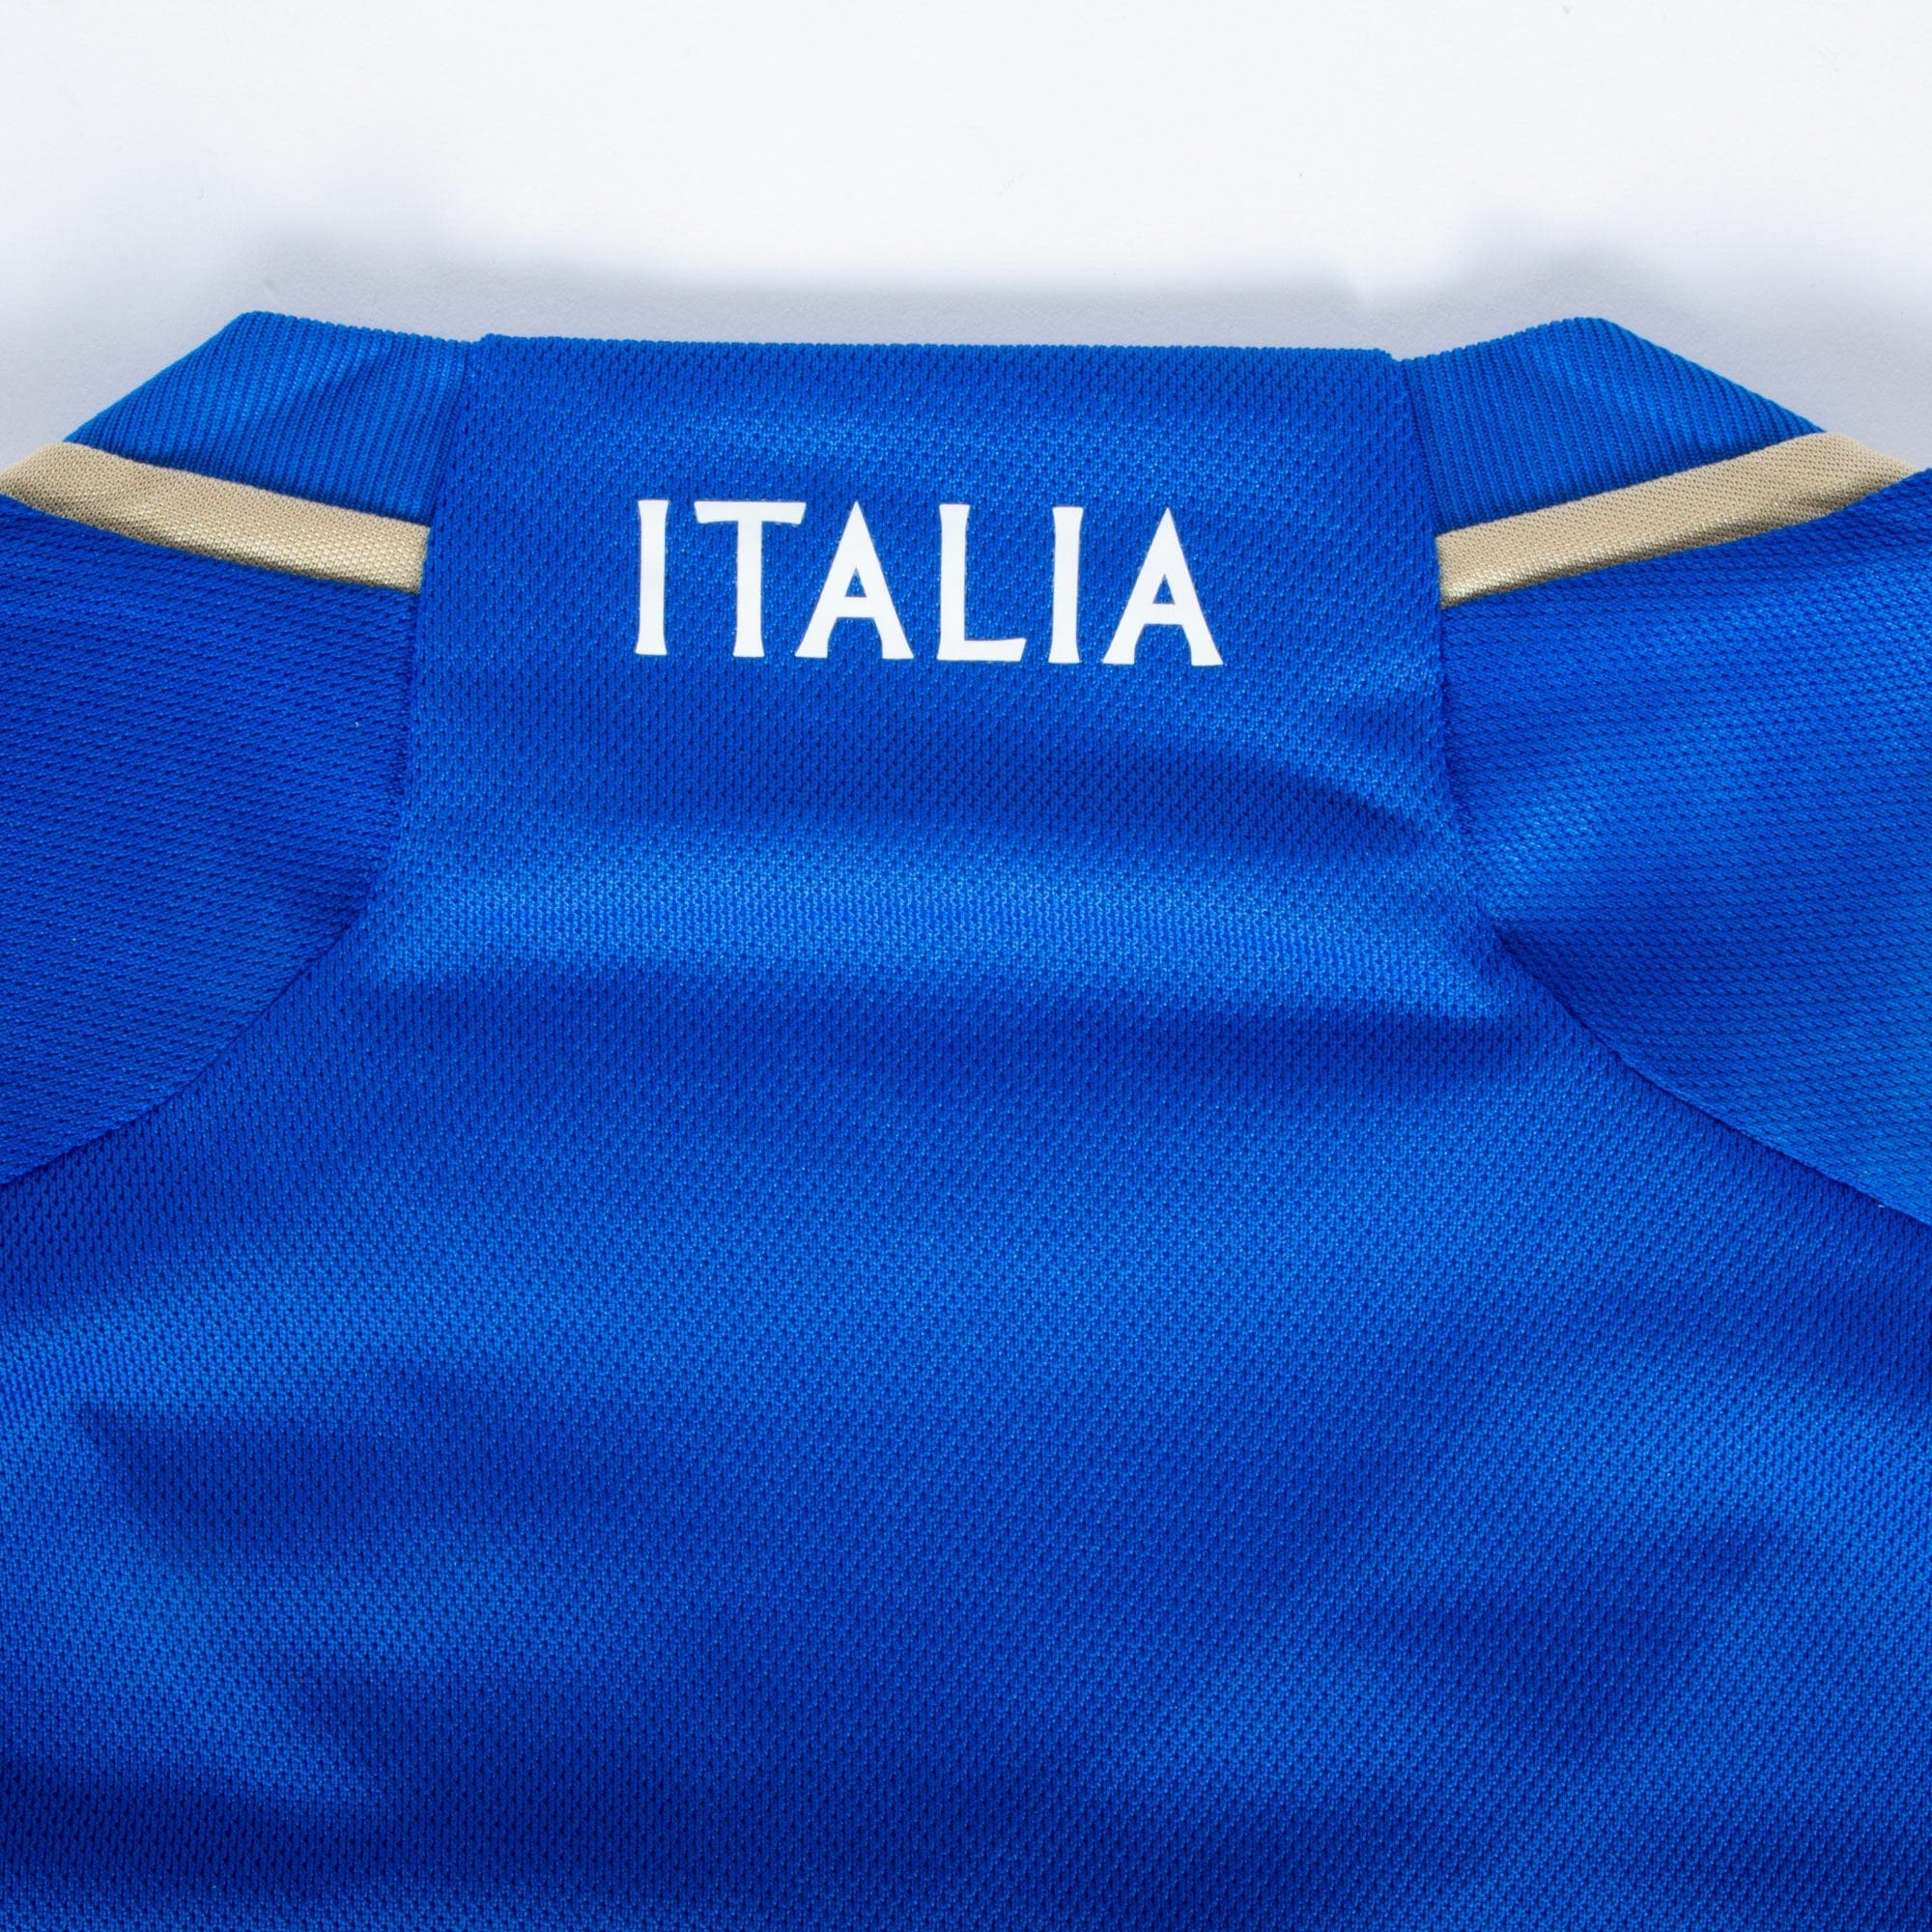 Italy Home Jersey 22/23 Euro 2024 Qualification